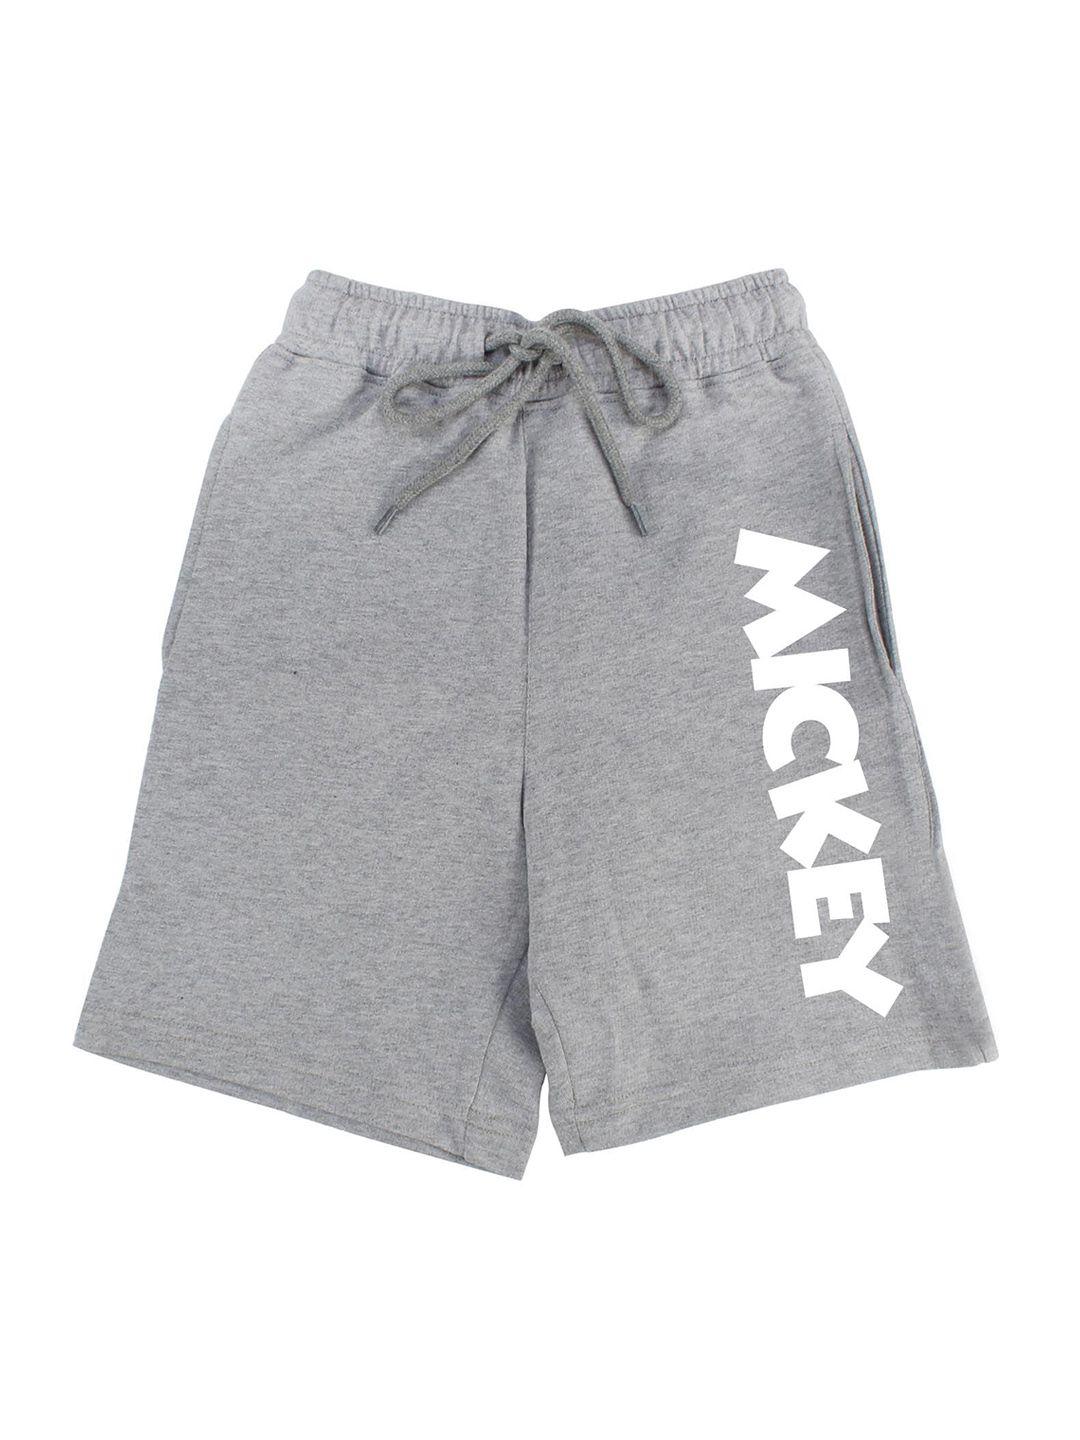 Disney by Wear Your Mind Boys Grey Typography Printed Mickey Mouse Shorts